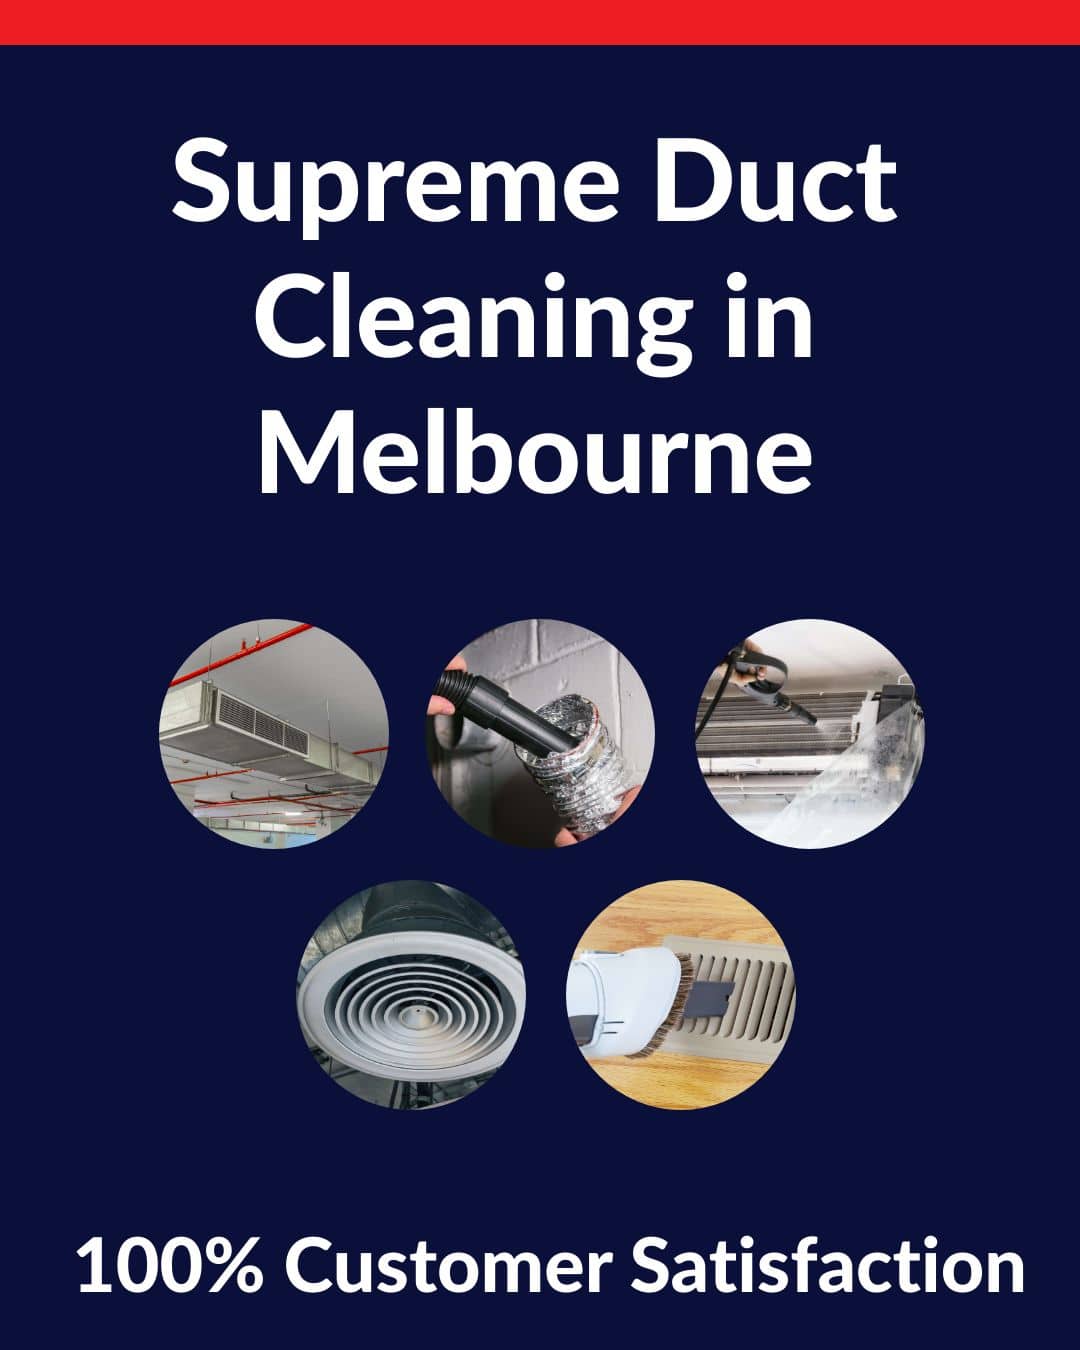 Supreme Duct Cleaning Guarantee